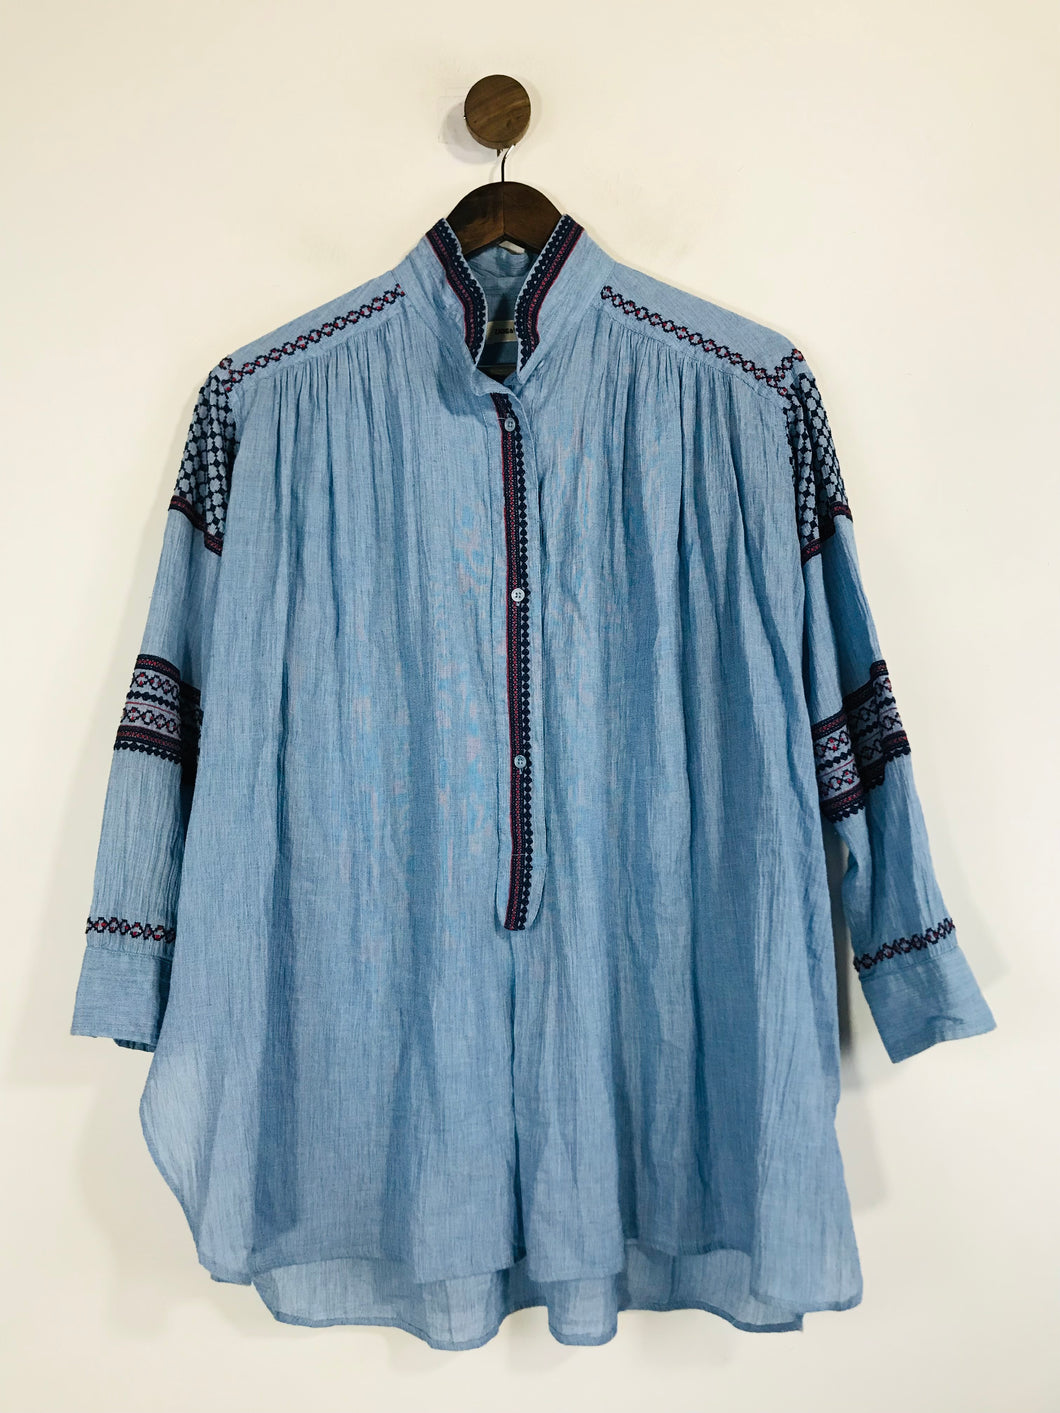 Zadig & Voltaire Women's Embroidered Tunic Blouse | XS UK6-8 | Blue